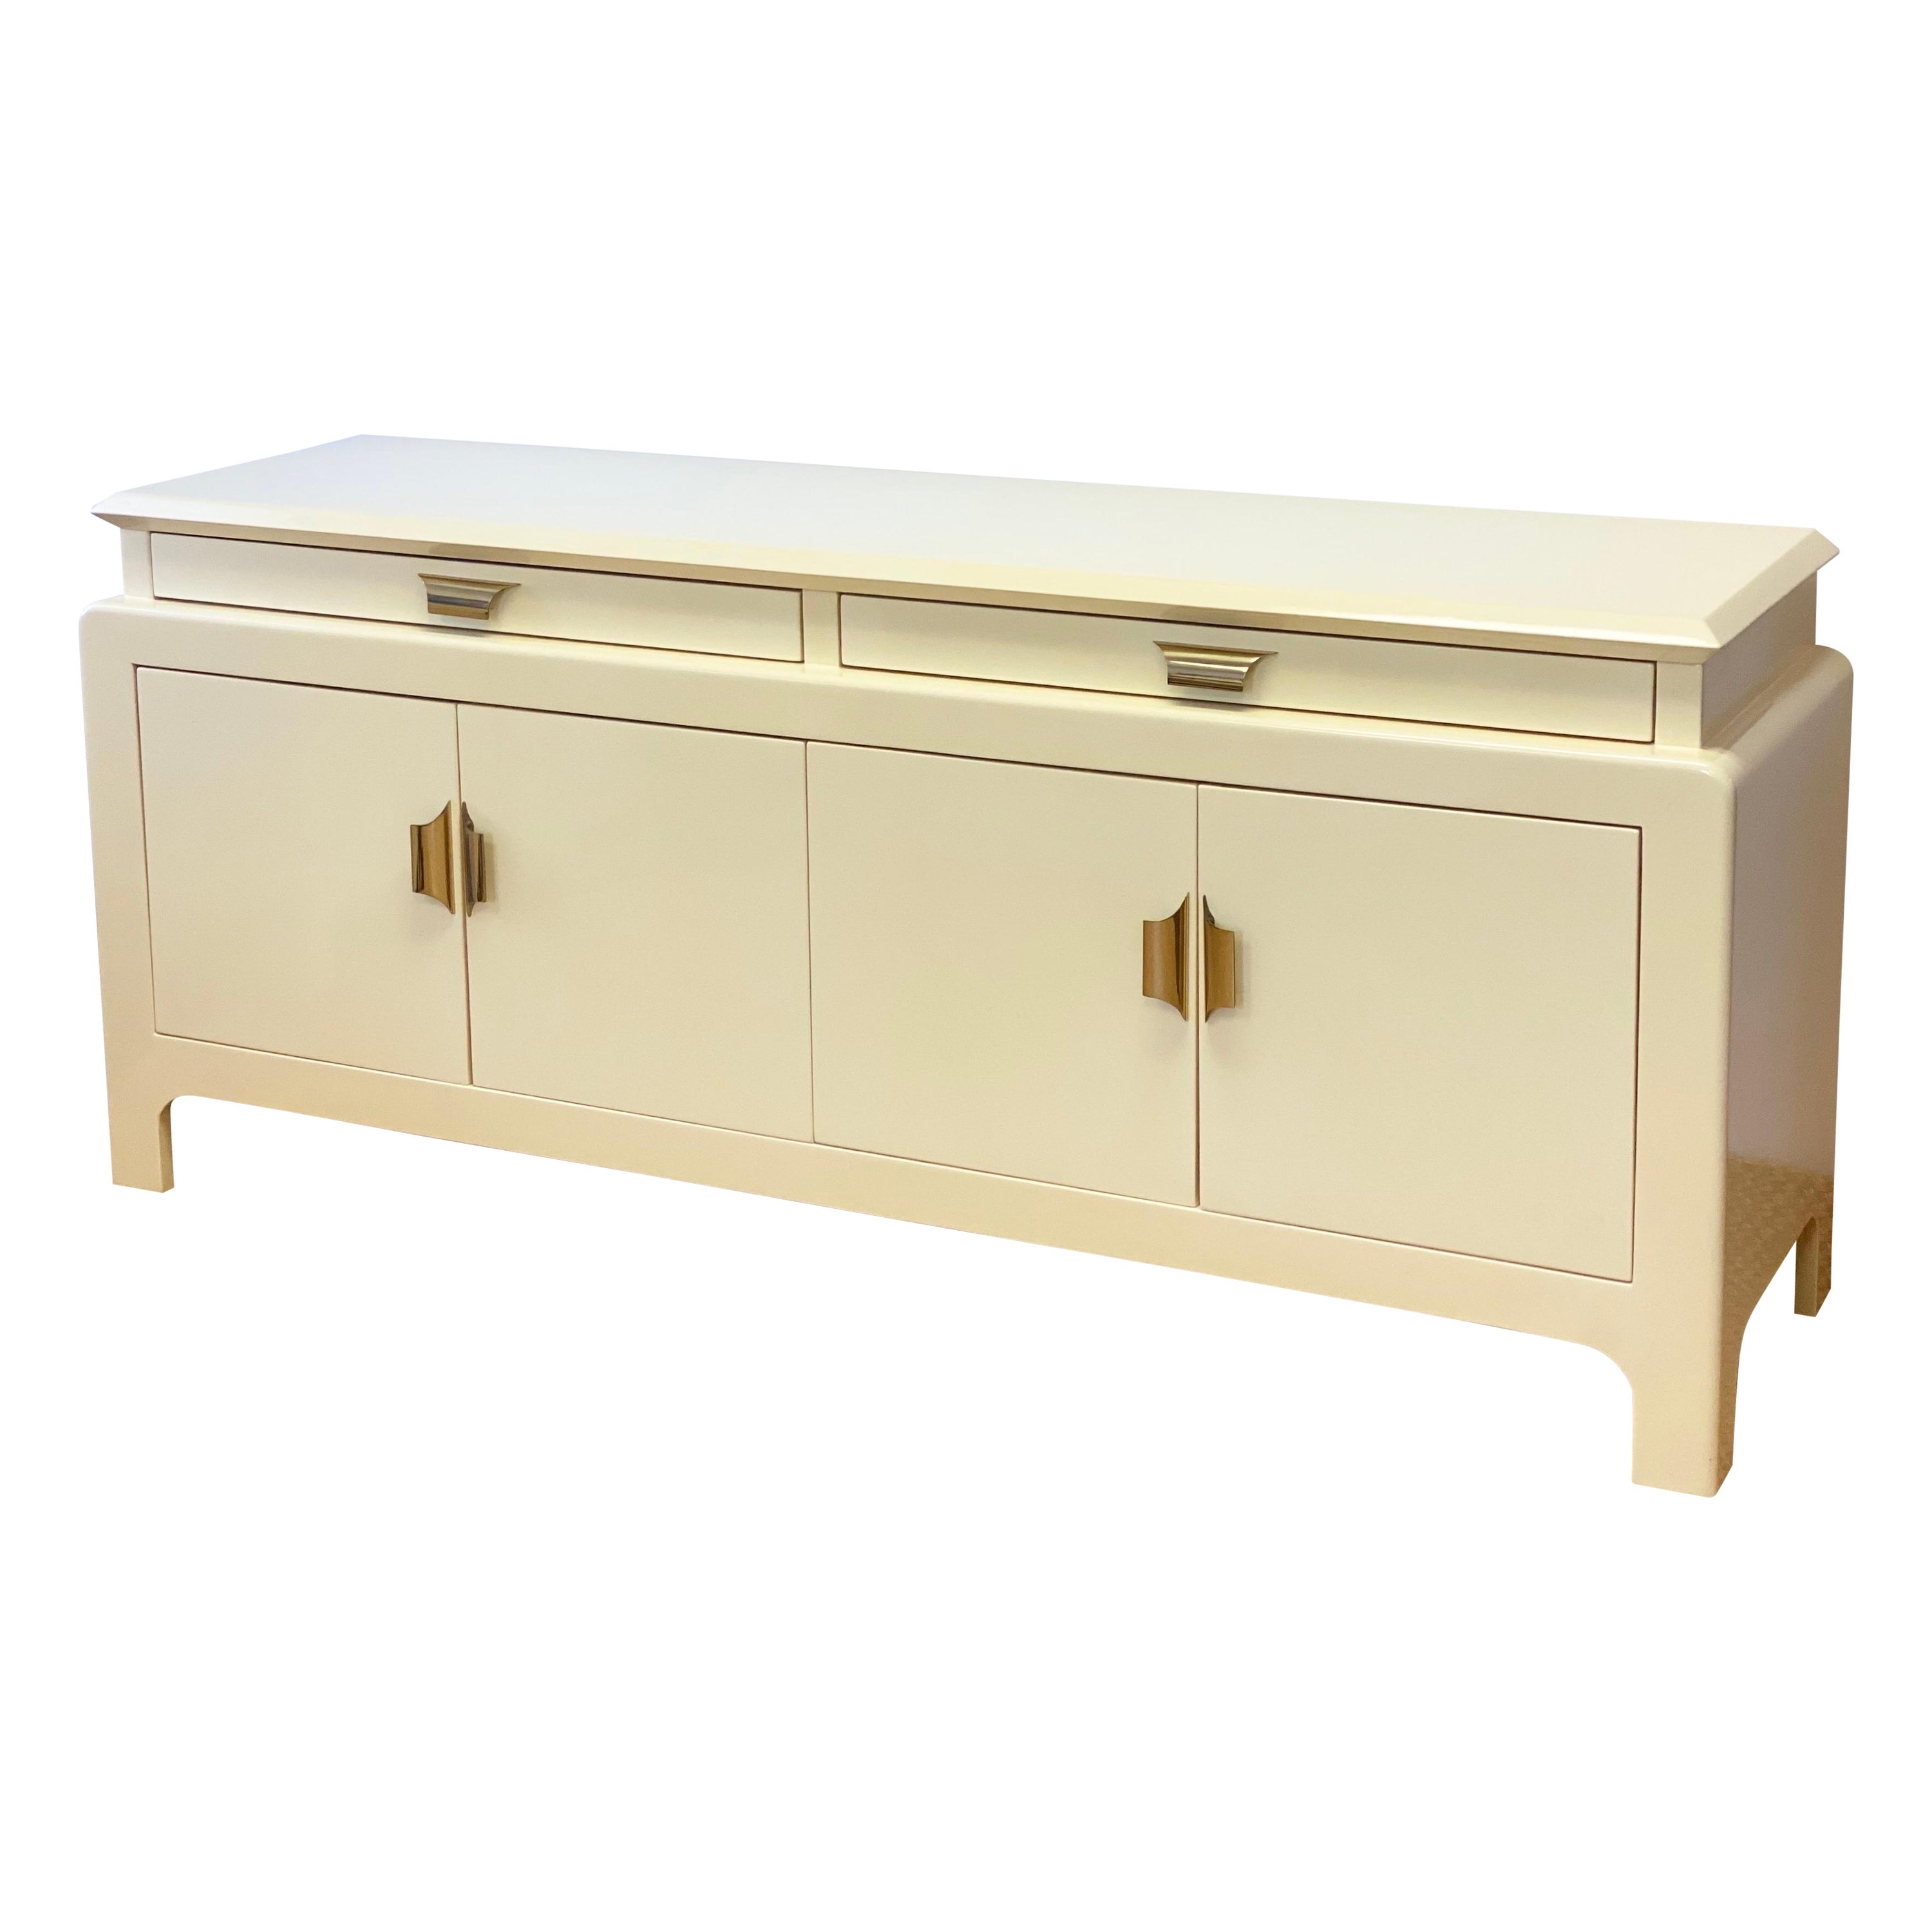 1970s Karl Springer Style Creamy Beige Lacquer and Brass Credenza